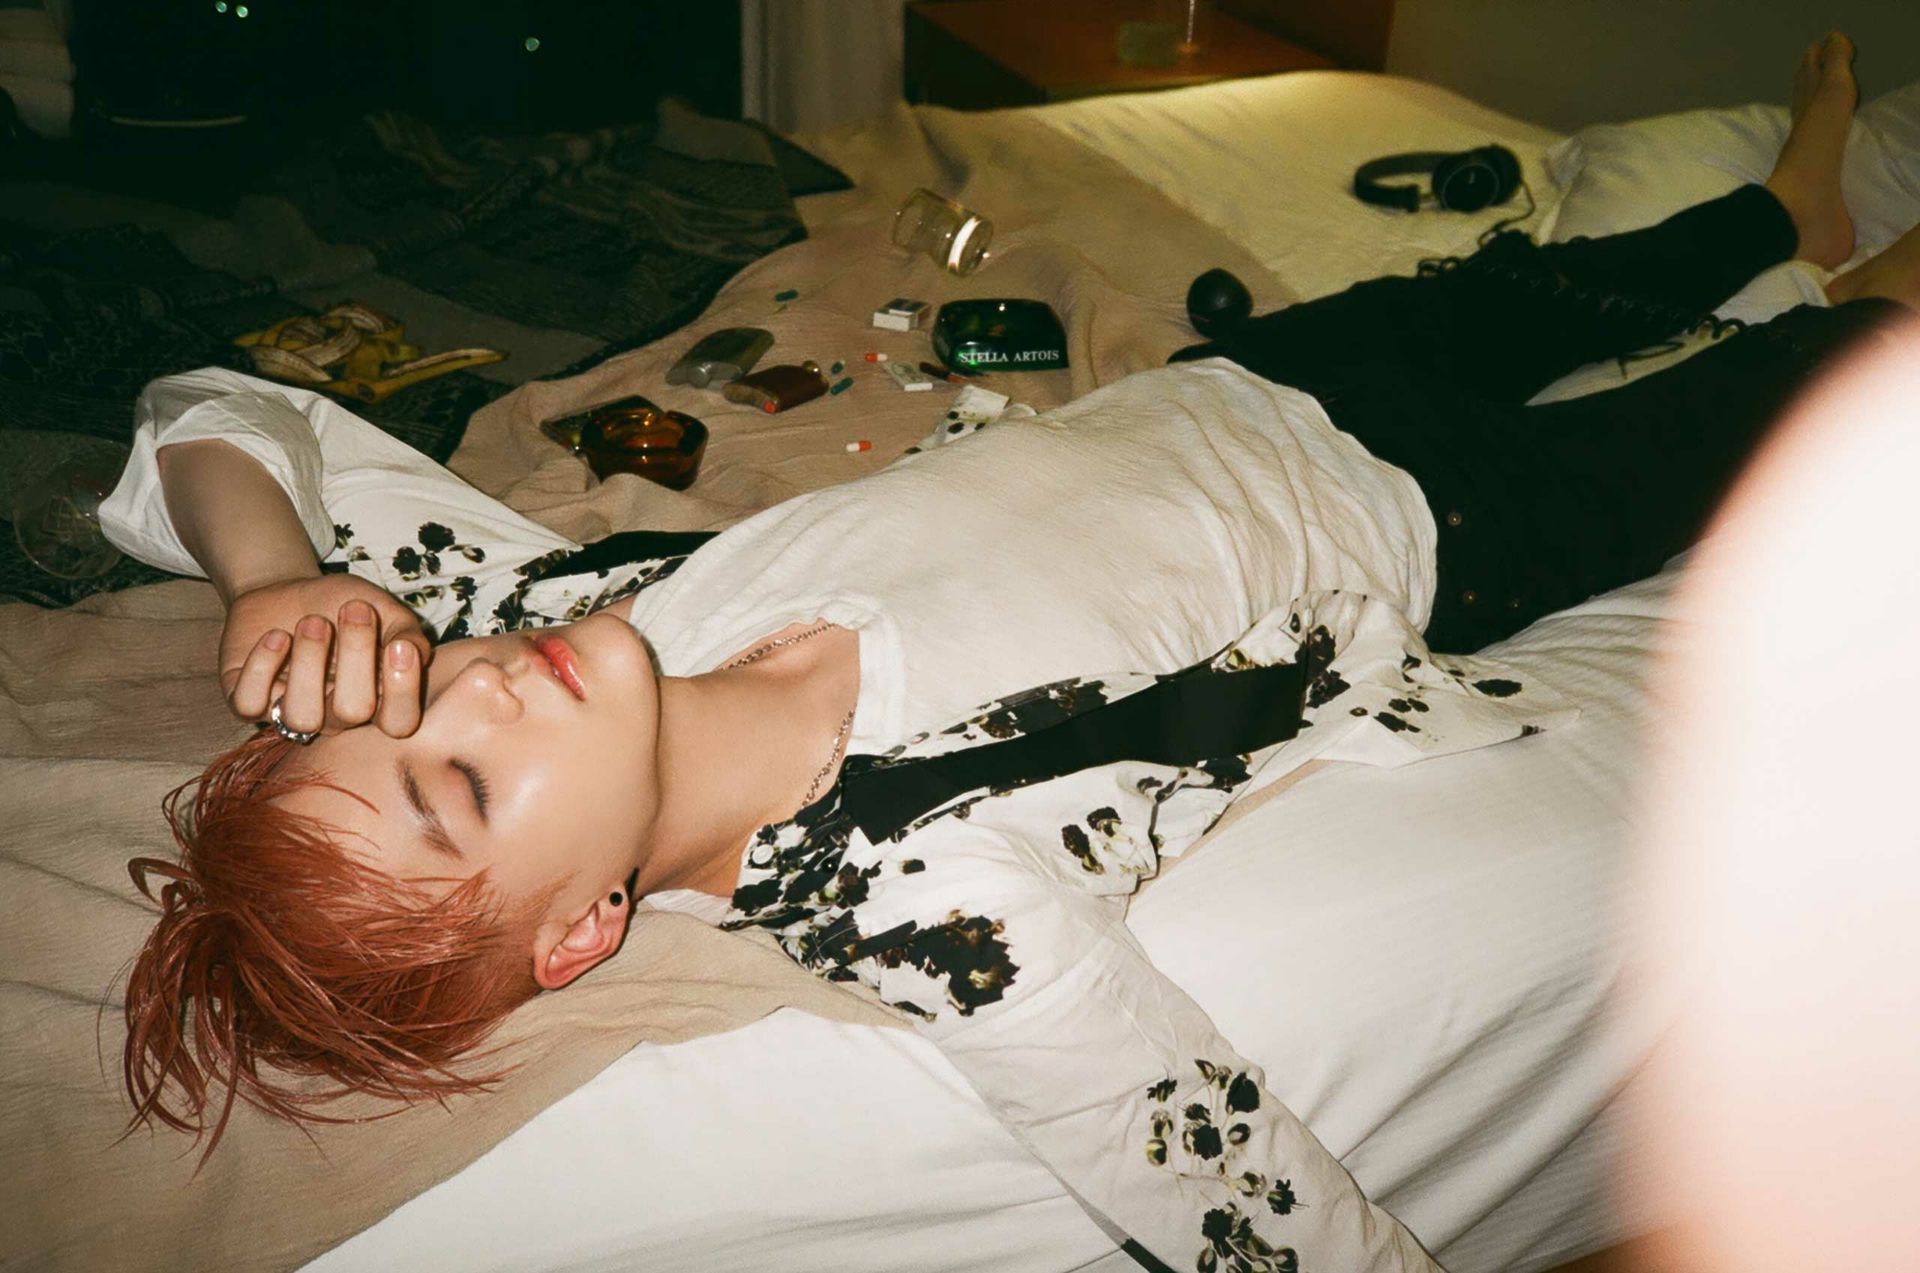 BTS Concept Photos - The Most Beautiful Moment Of Life pt 1 [3] -   13 beauty Photoshoot bts ideas